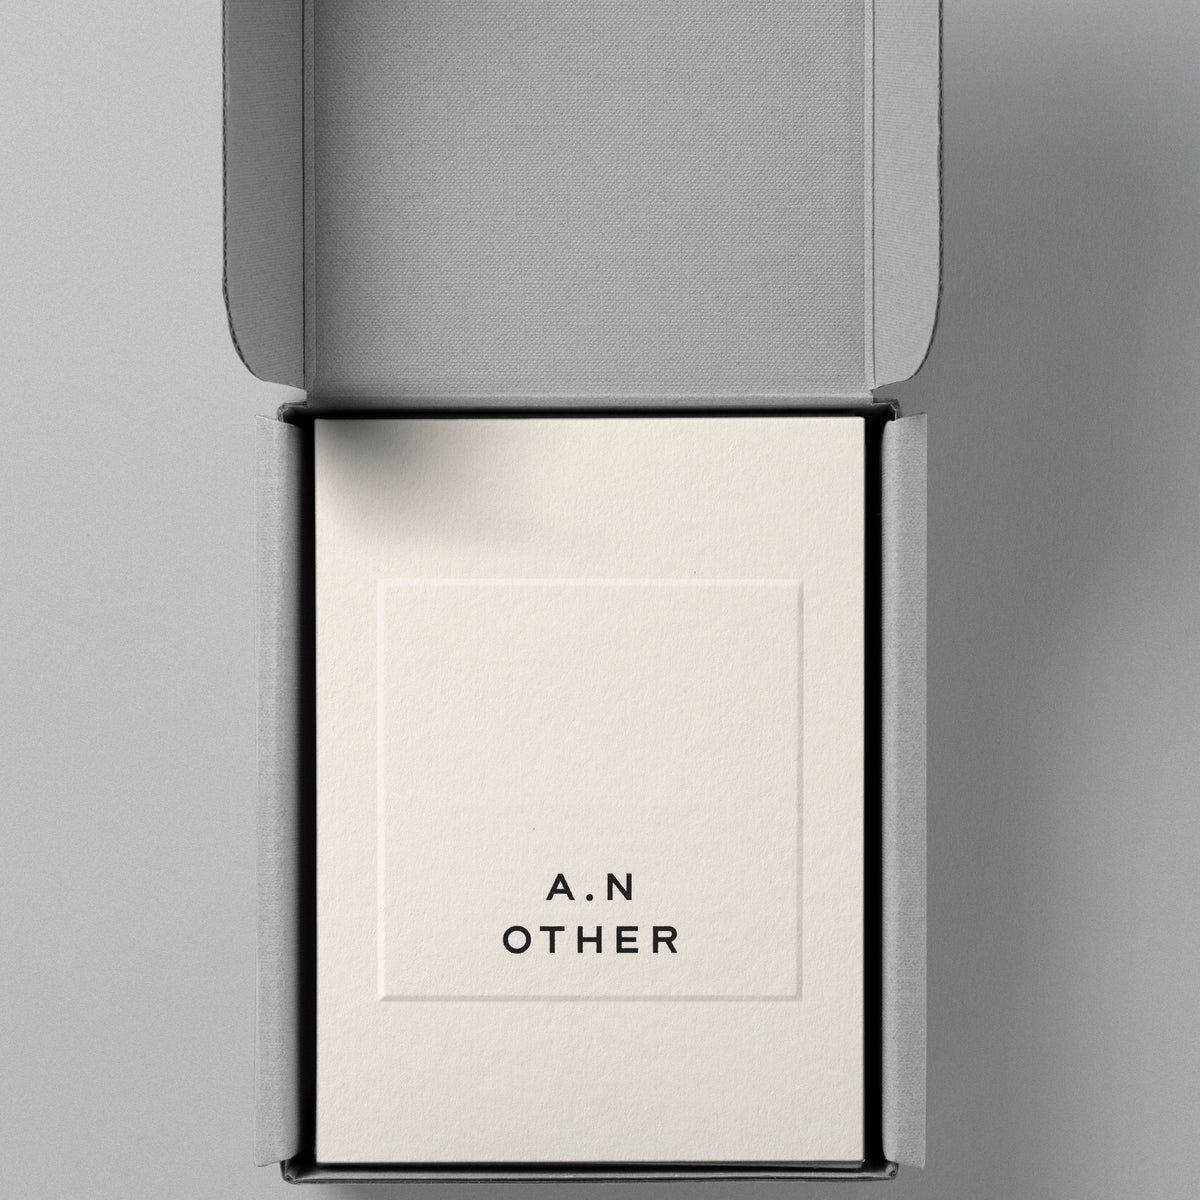 A.N Other Parfum - WD2018